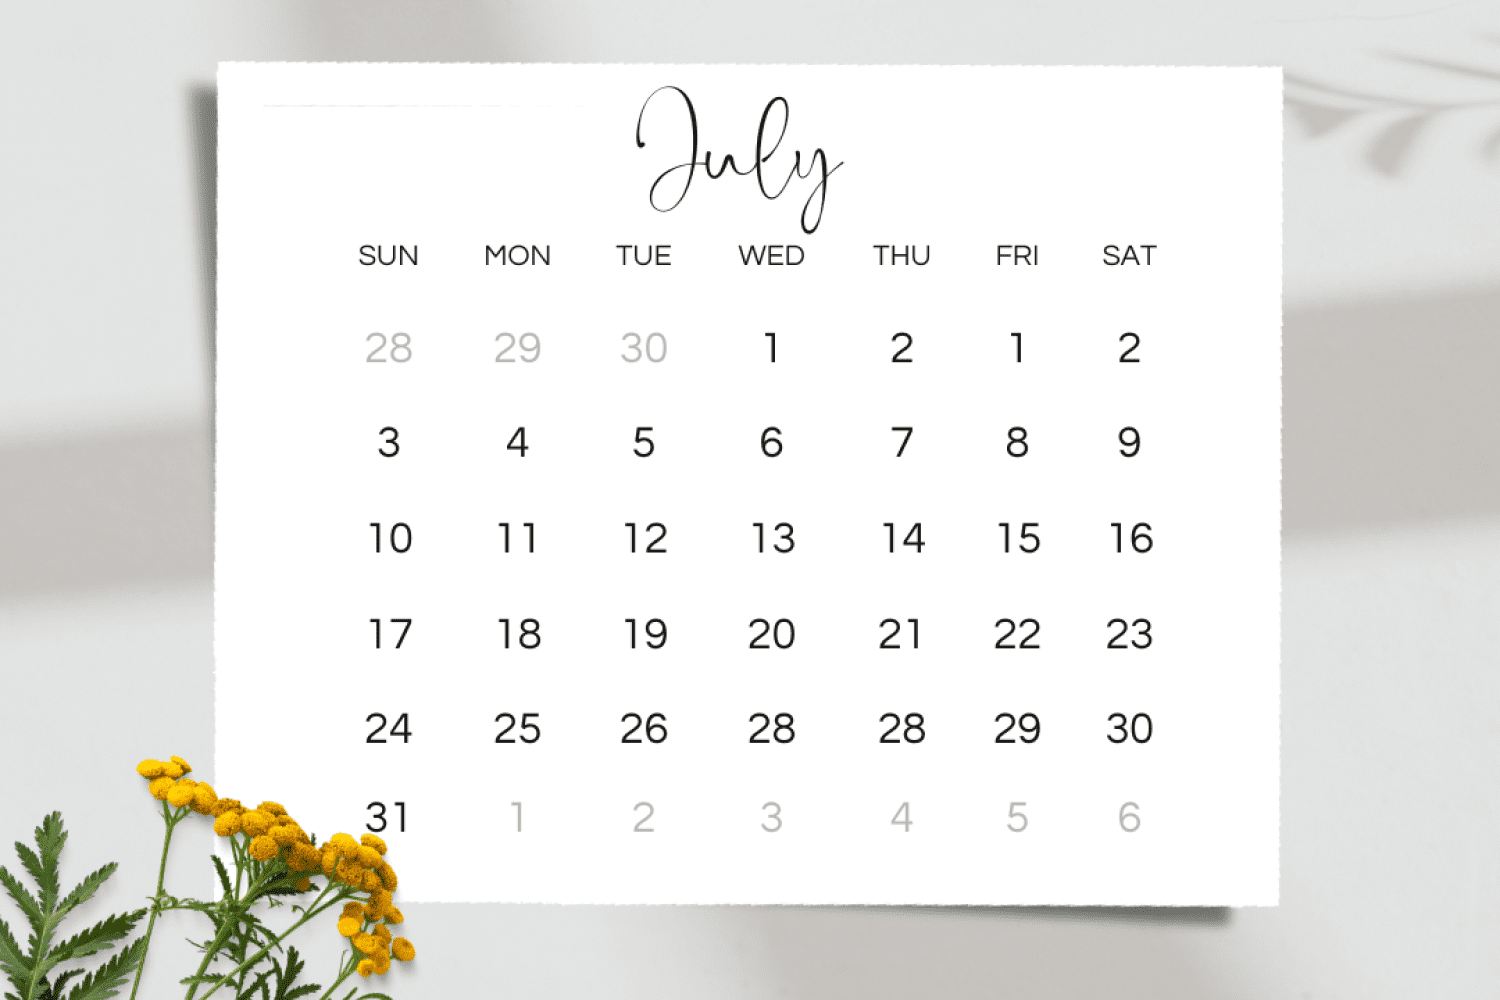 Calendar in a minimalist style with a small bouquet of flowers.